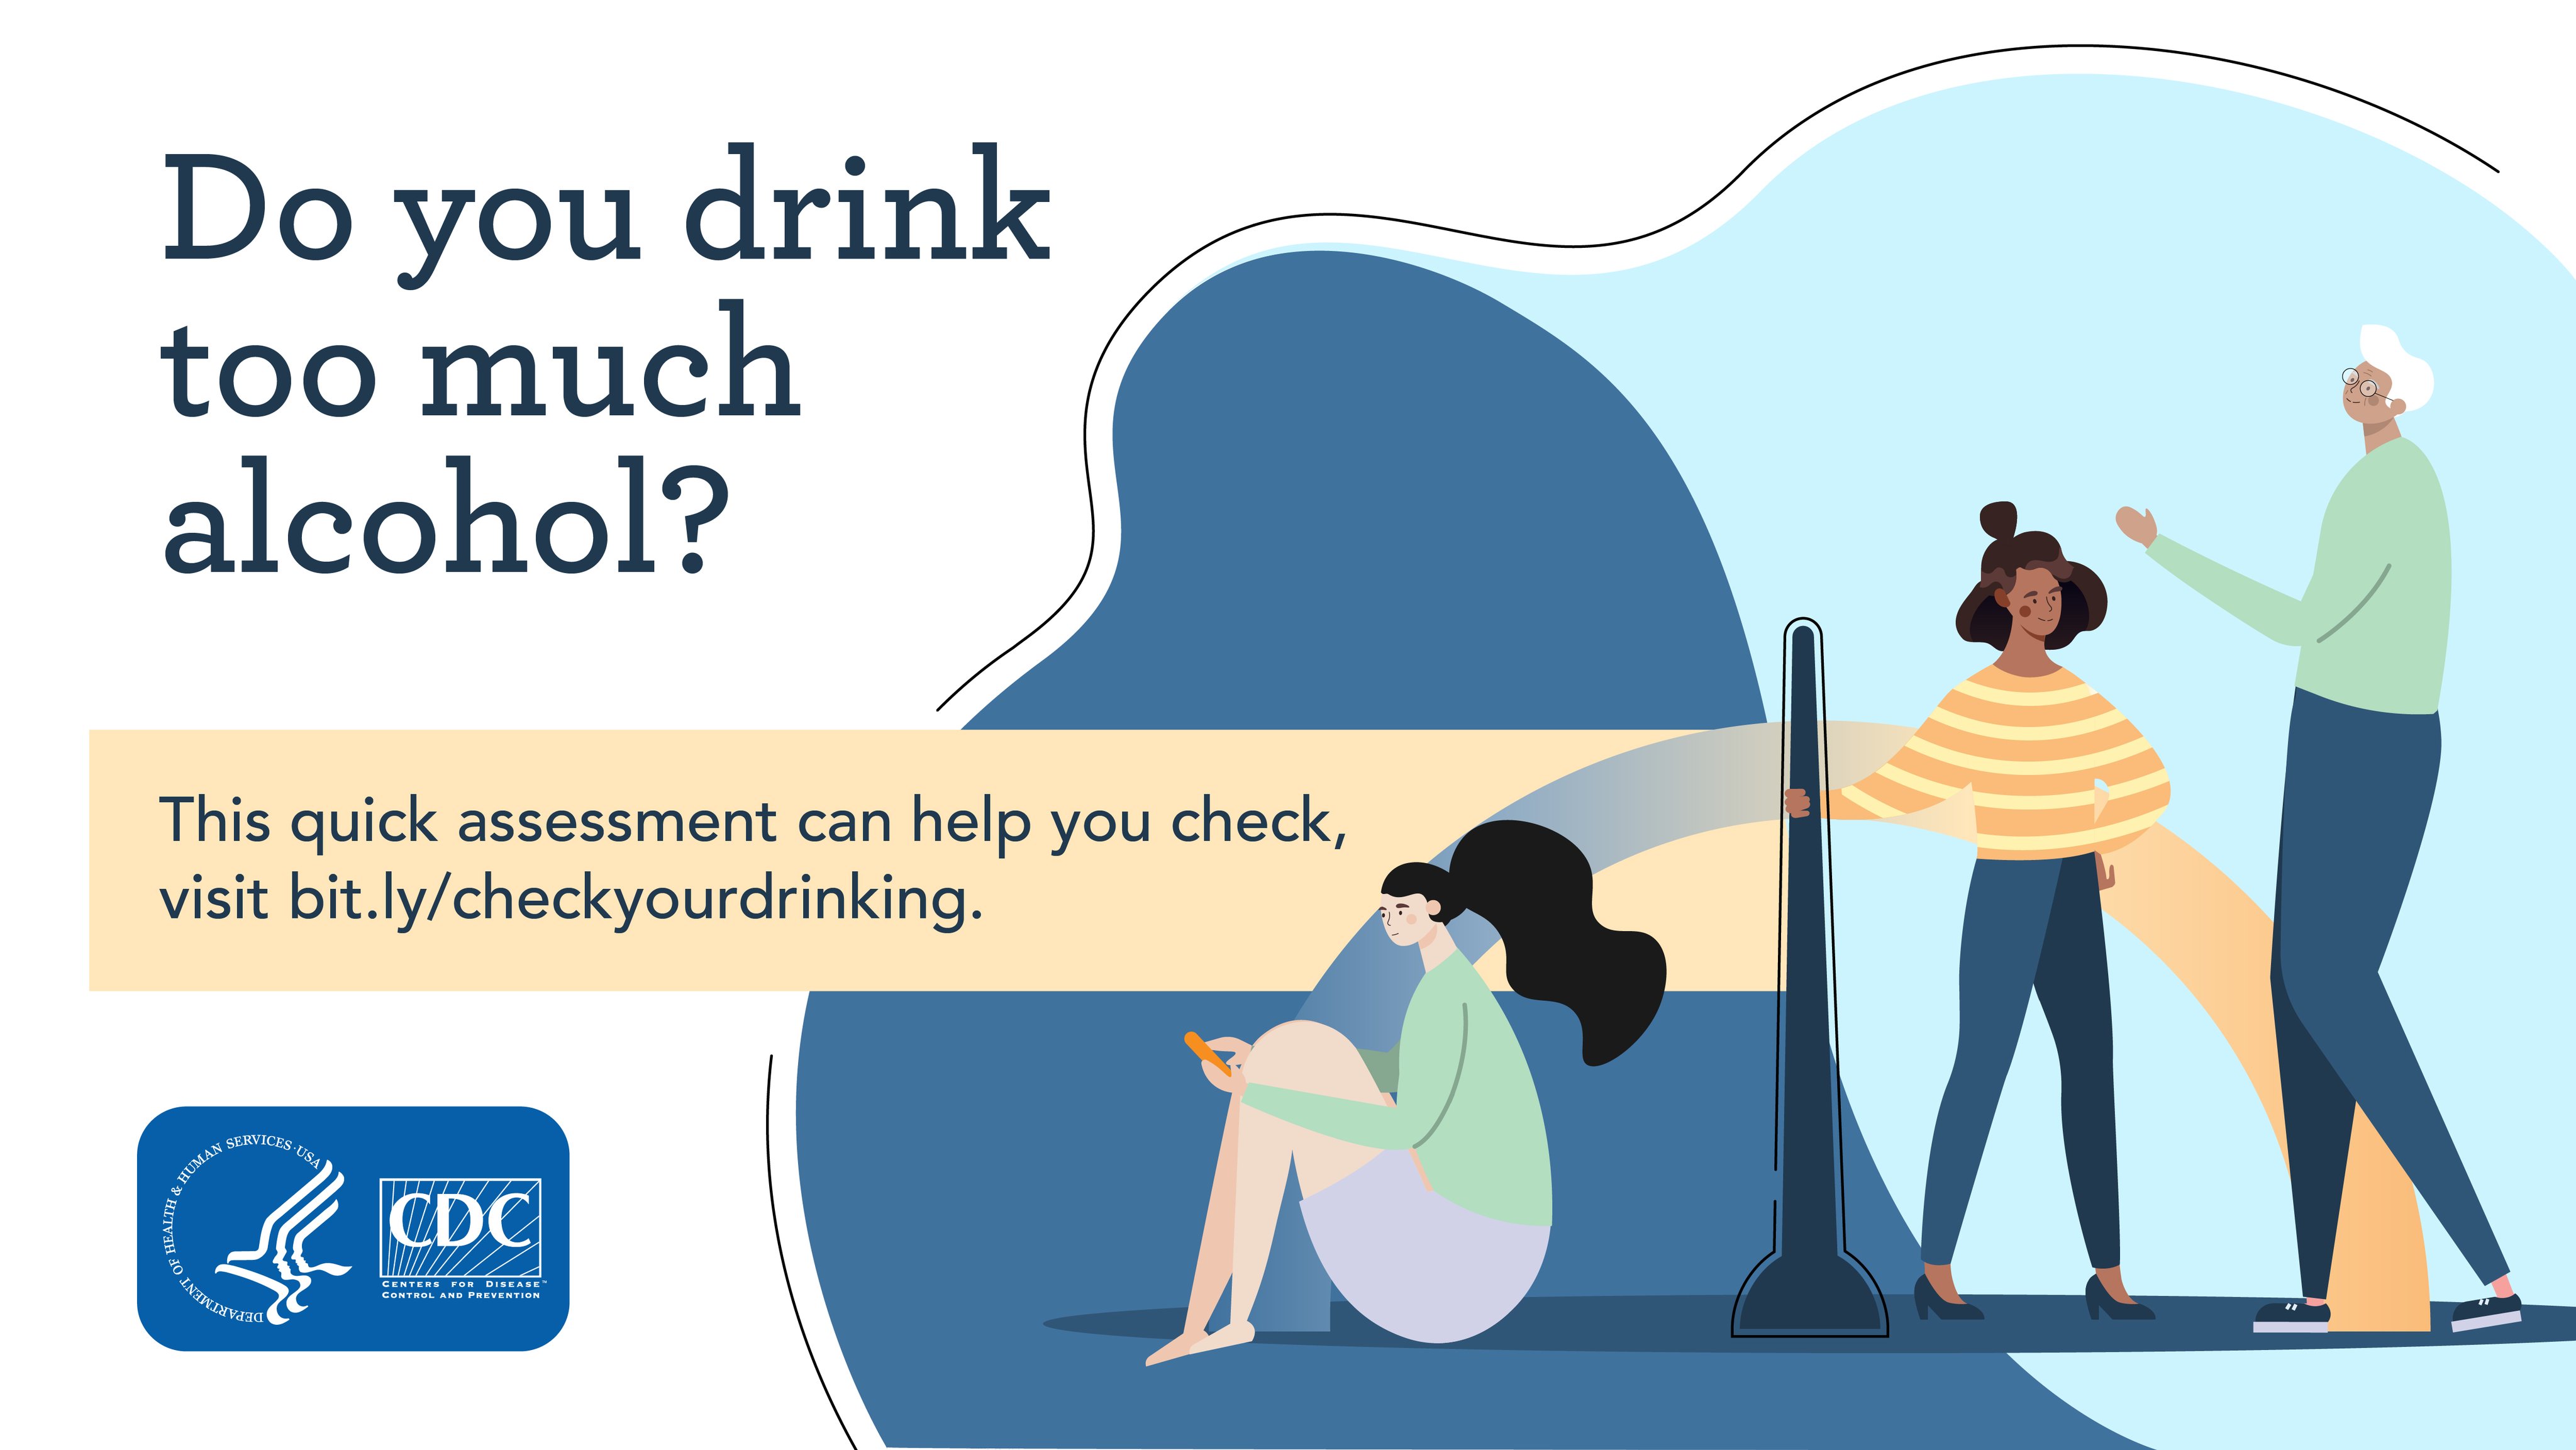 Graphic text says "Do you drink too much alcohol? This quick assessment can help you check, visit bit.ly/checkyourdrinking". There is also an illustration of three people surrounding a meter with the needle in the middle, representing an alcohol assessment tool.